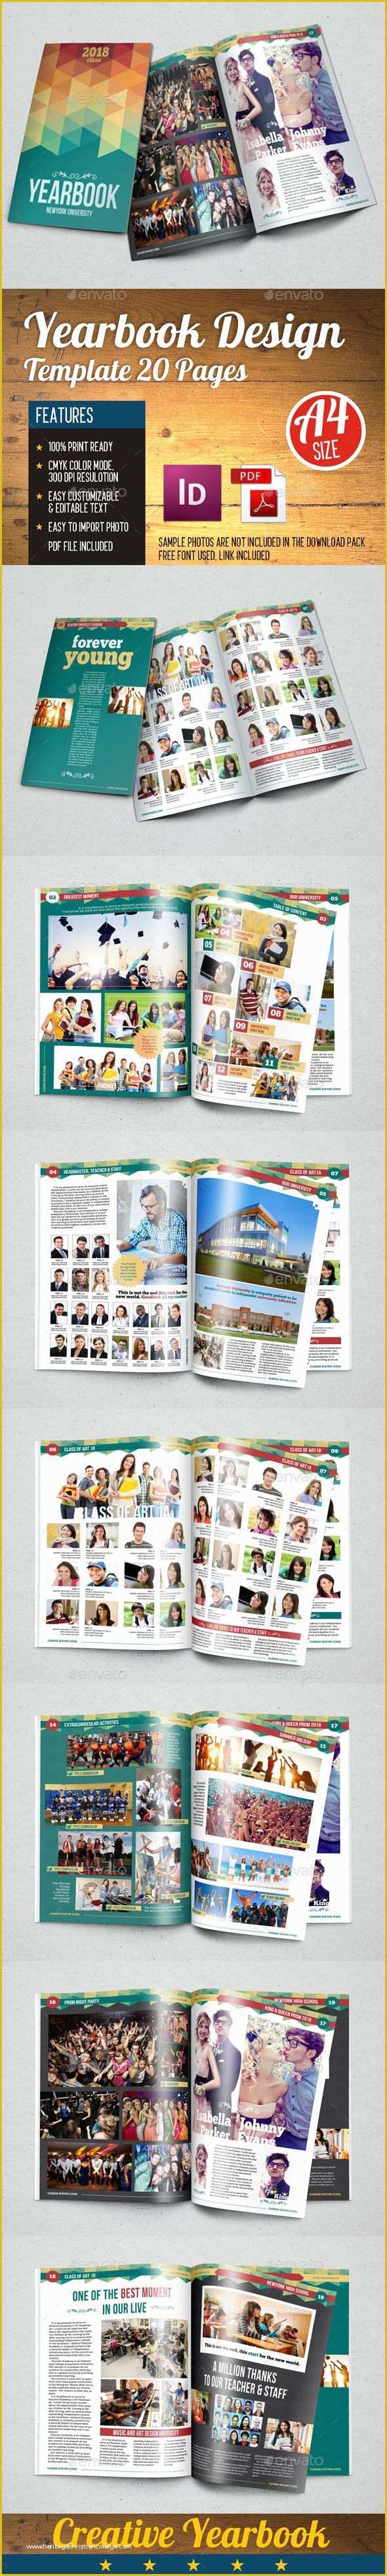 Free Indesign Yearbook Template Download Of Yearbook Template Design